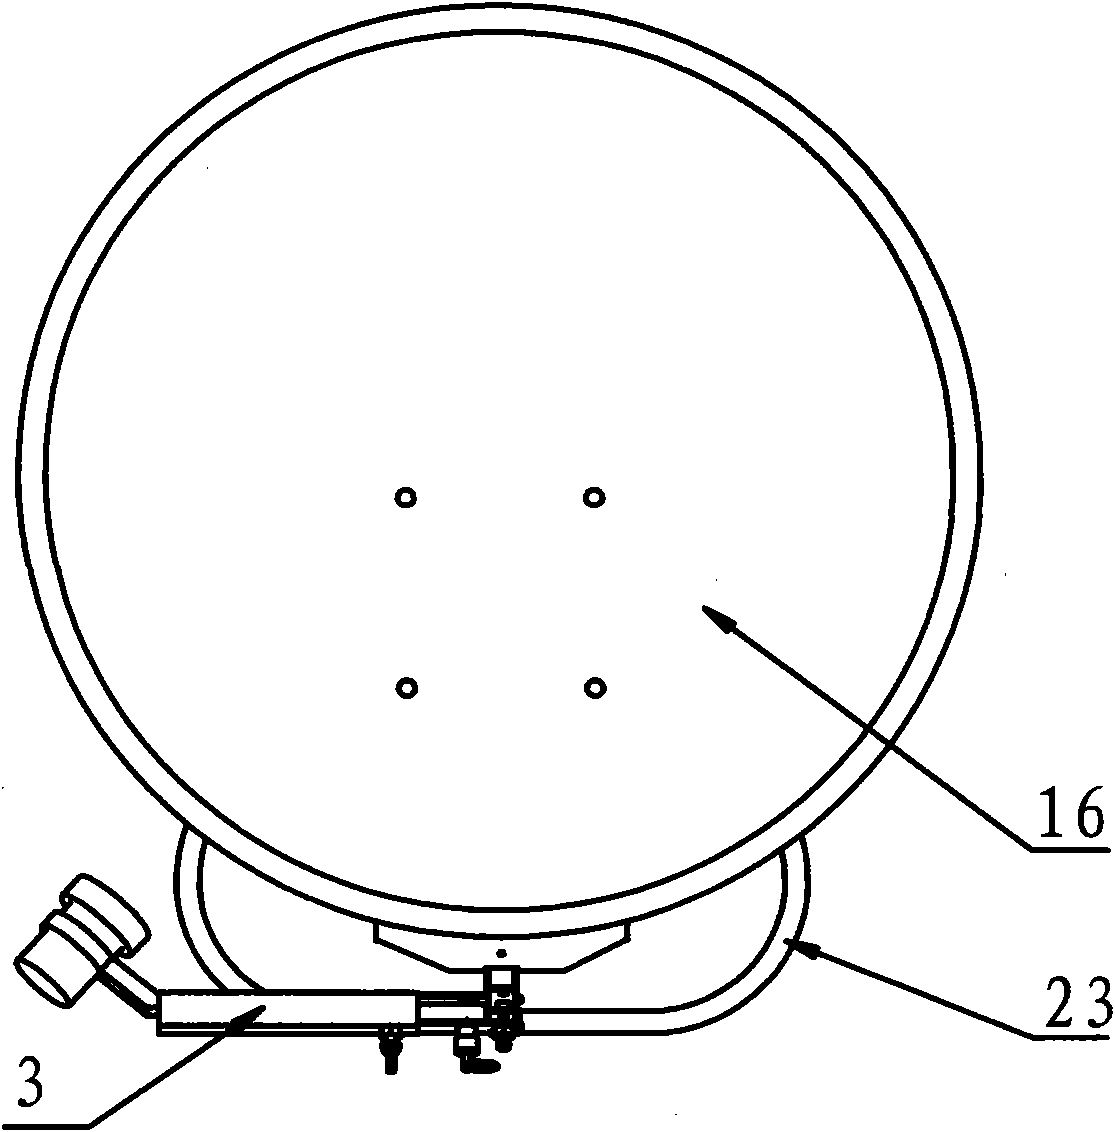 Portable paraboloid satellite earth antenna capable of being rapidly erected and folded